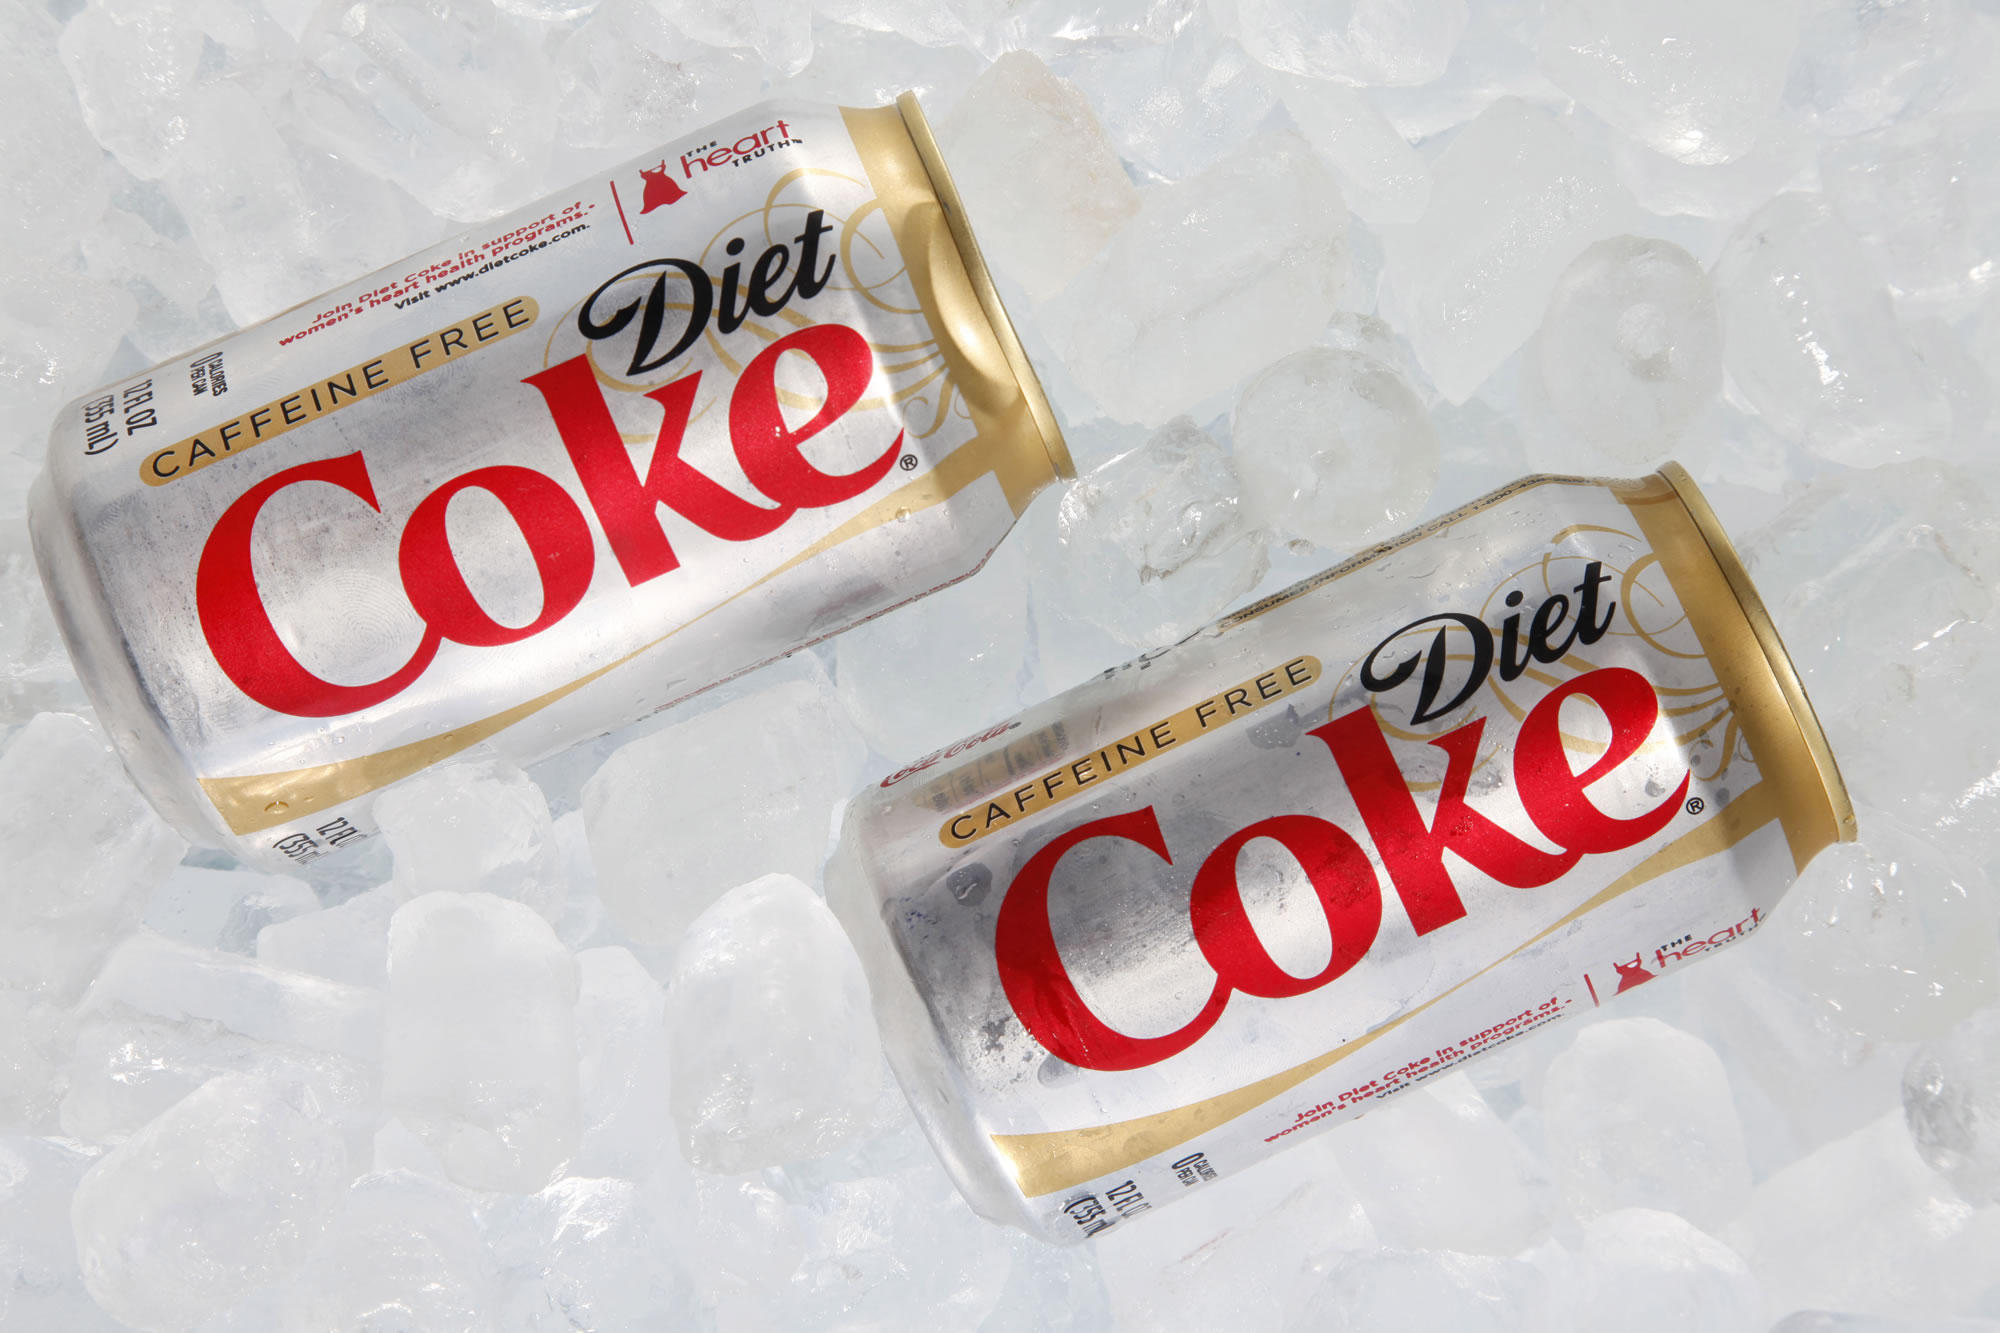 Two cans of Caffeine Free Diet Coke on ice.